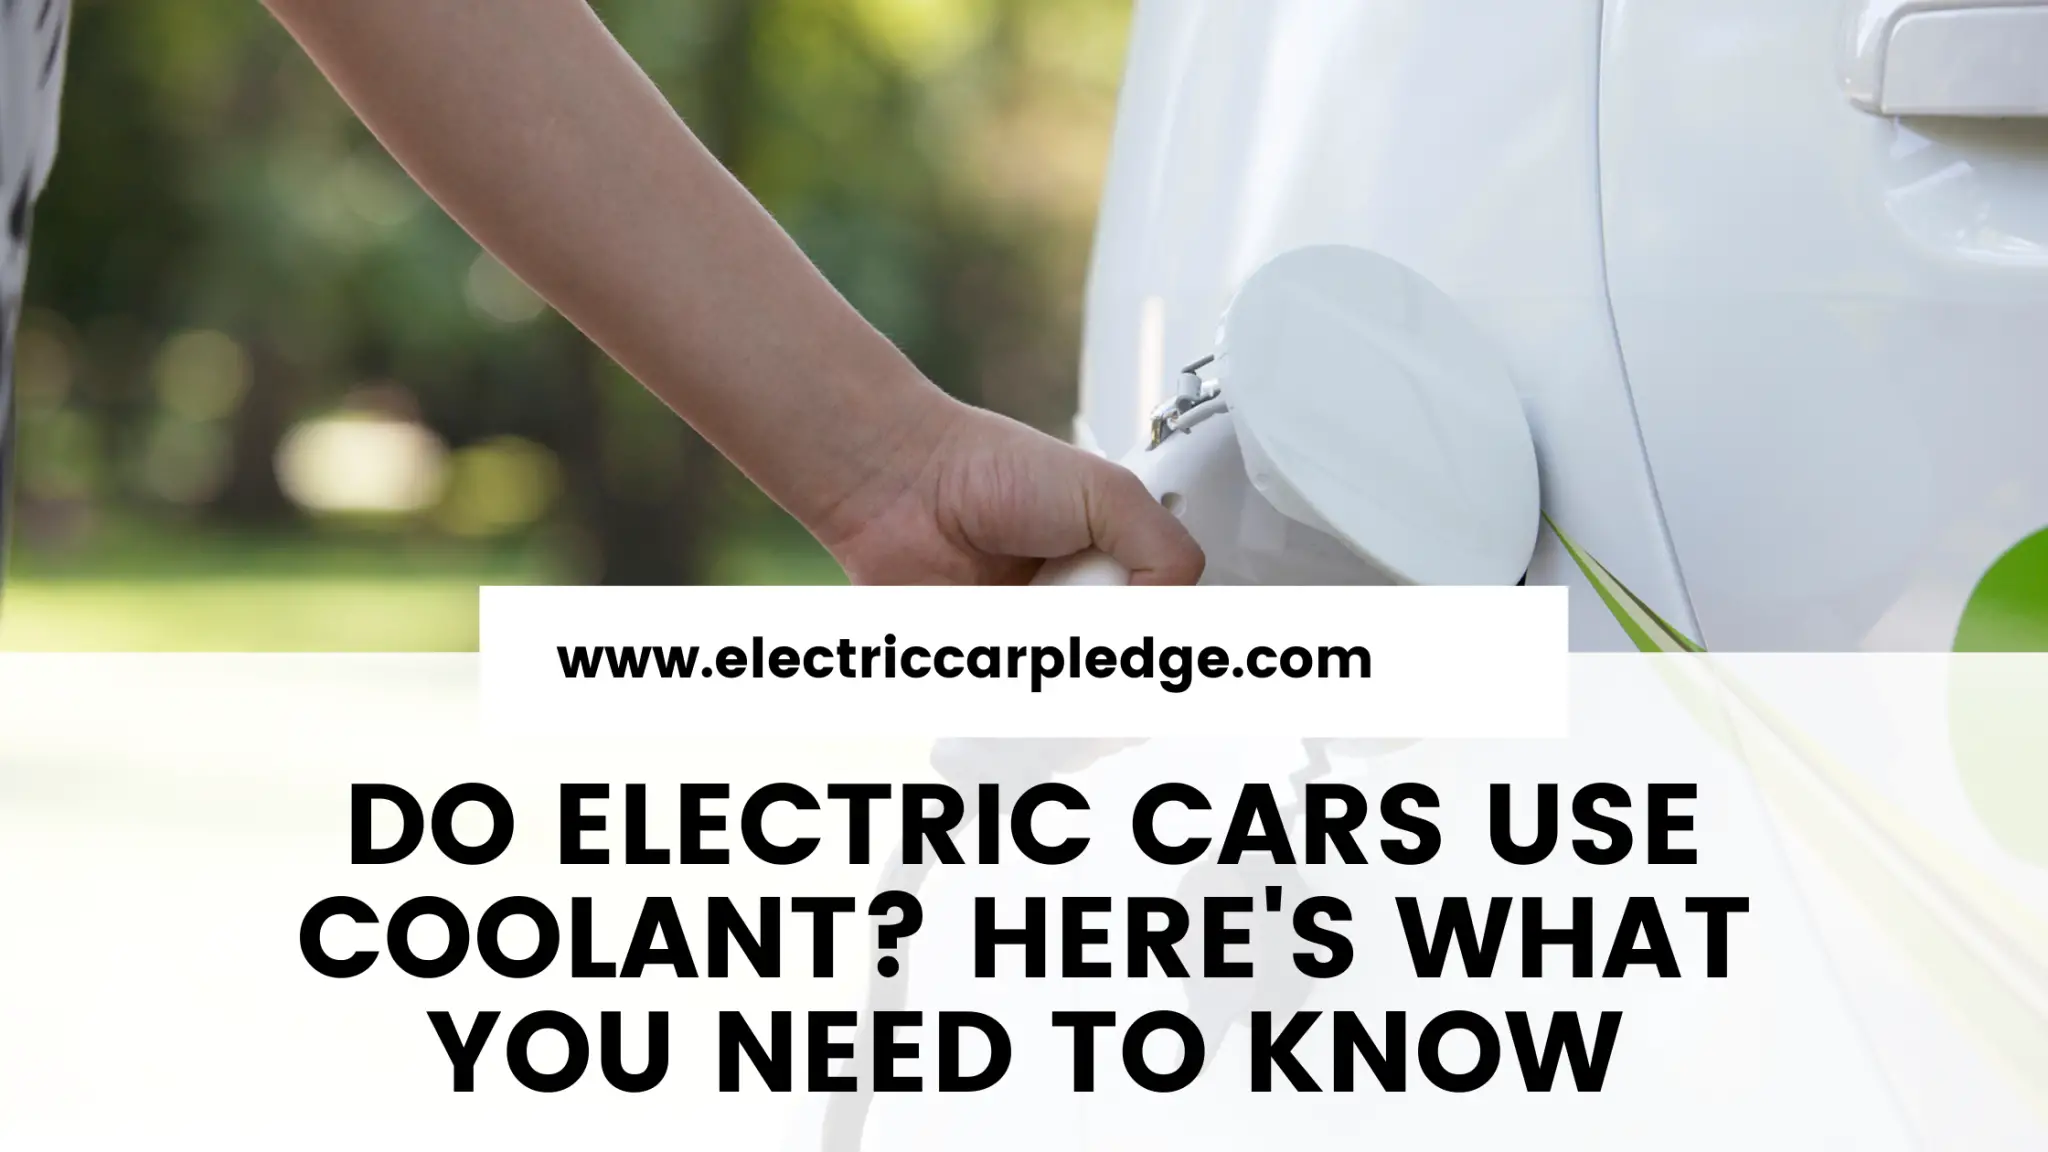 Do Electric Cars Use Coolant? Here’s What You Need to Know